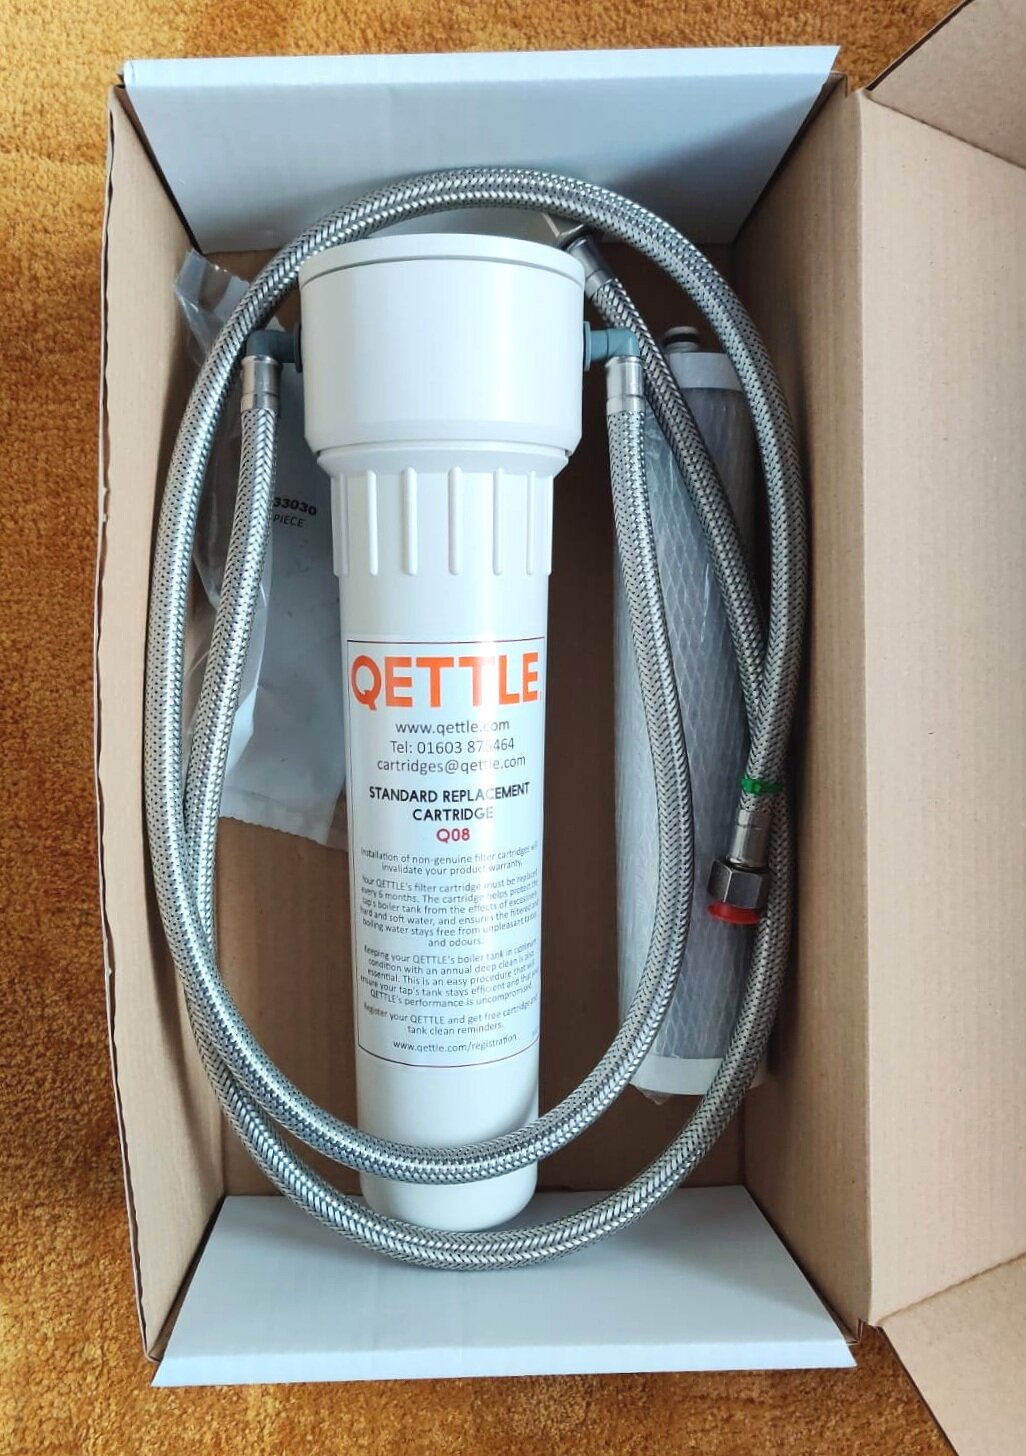 Qettle boiling water tap in the box